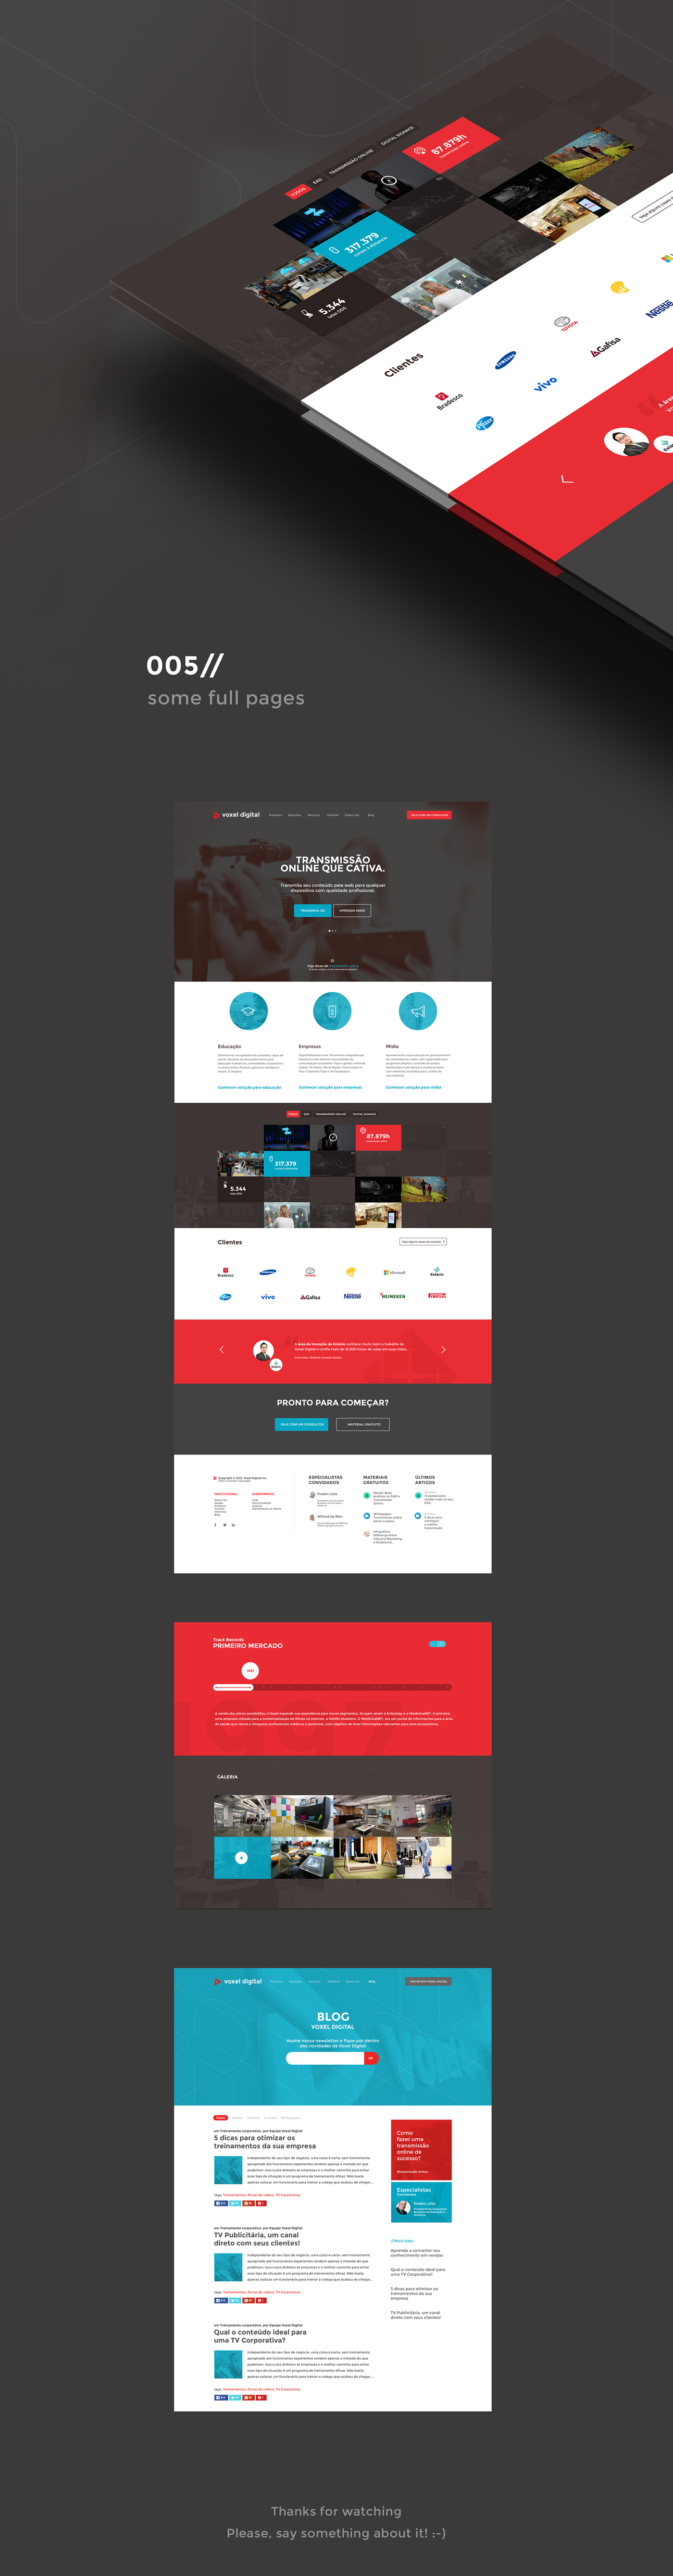 red play button  Webdesign visual identity icons inspirations Single Page blog inspiration